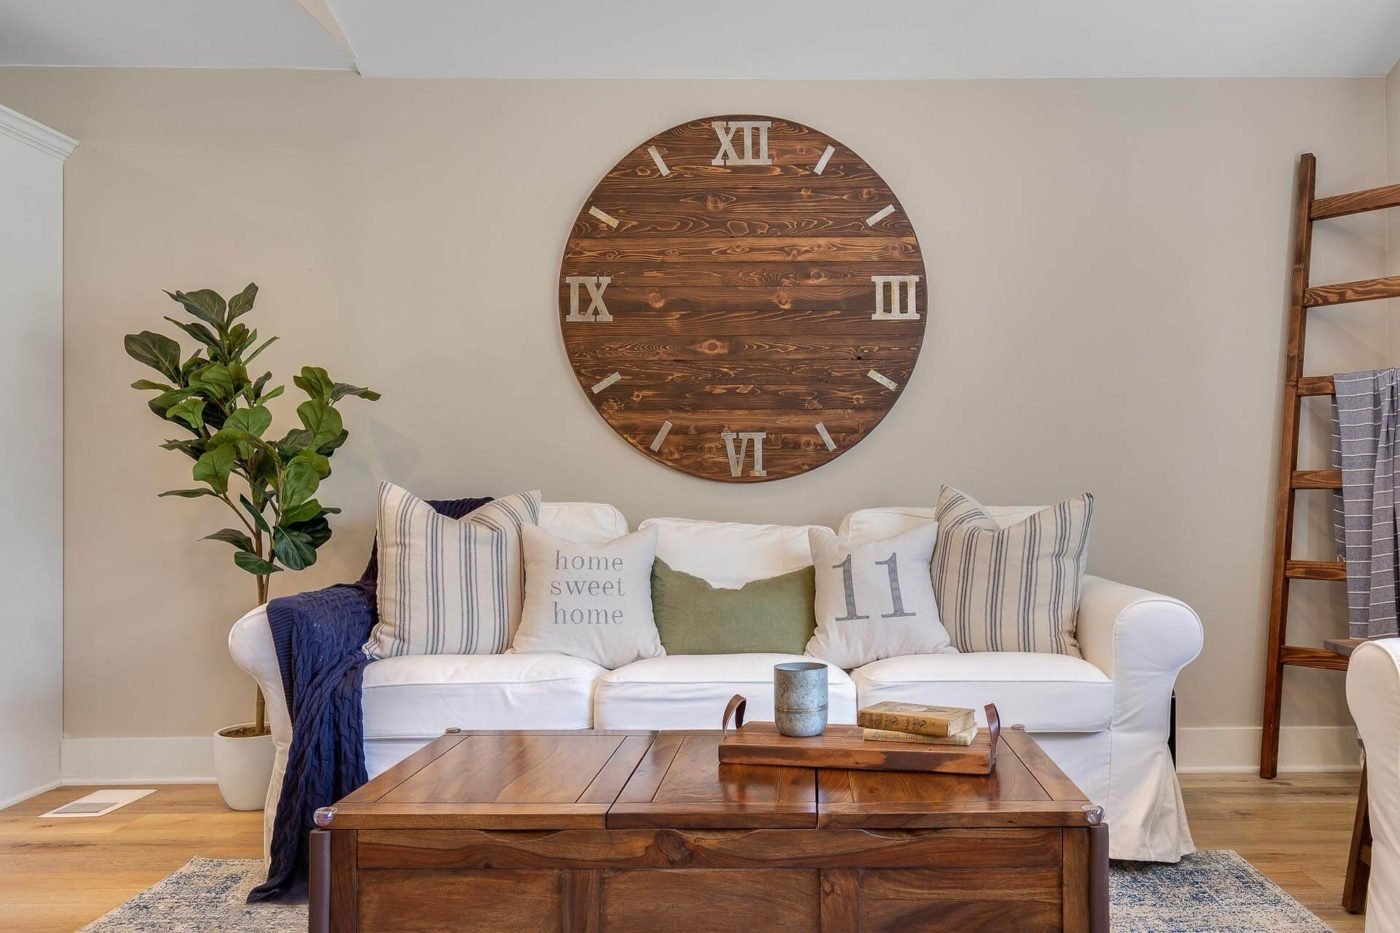 Photo of the interior design of the living room with a custom-made clock and professionally staged